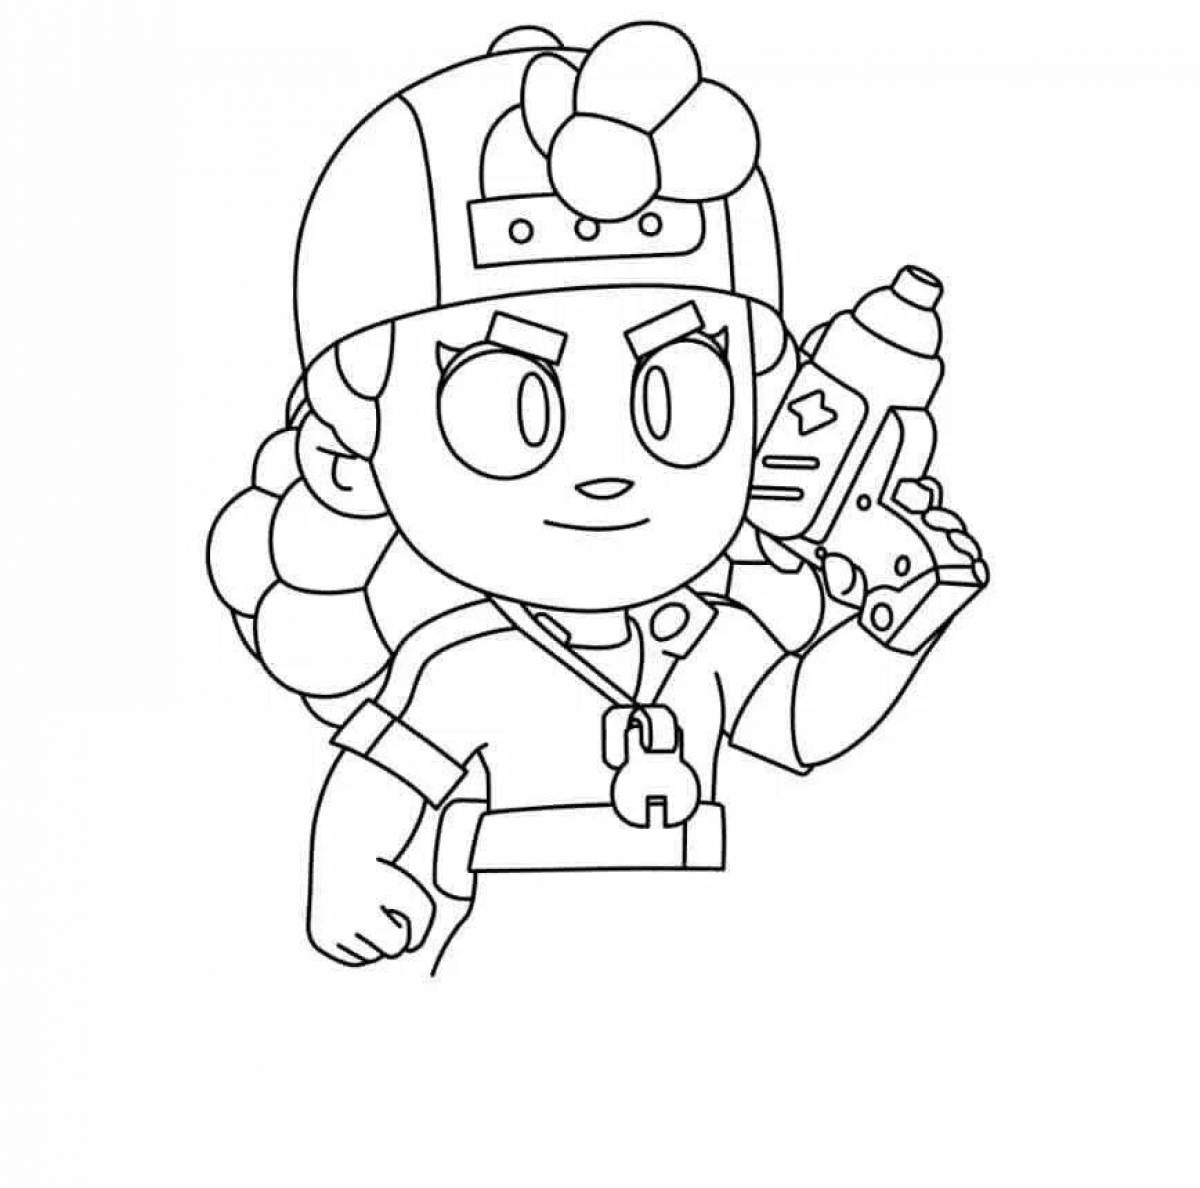 Bold squick coloring page